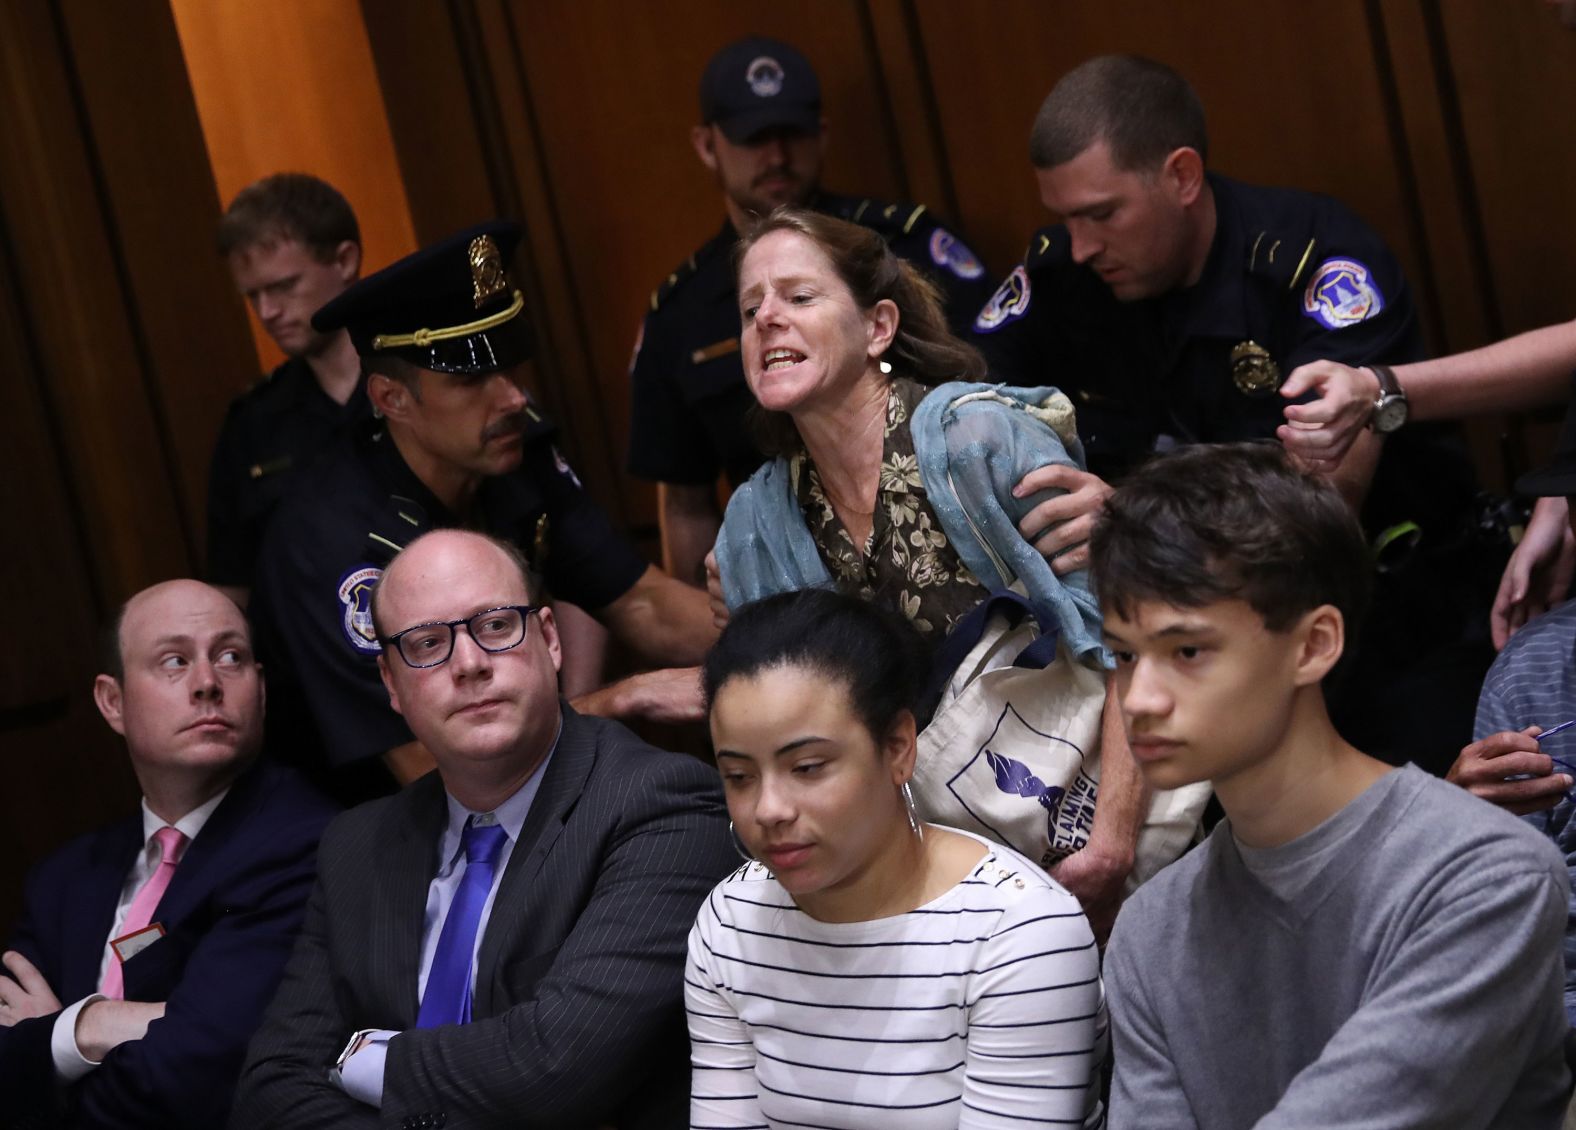 Police remove a protester disrupting the hearing on Wednesday. Capitol Police said <a href="https://www.cnn.com/2018/09/04/politics/capitol-hill-police-protest-arrests/index.html" target="_blank">they arrested 70 people</a> on Tuesday.